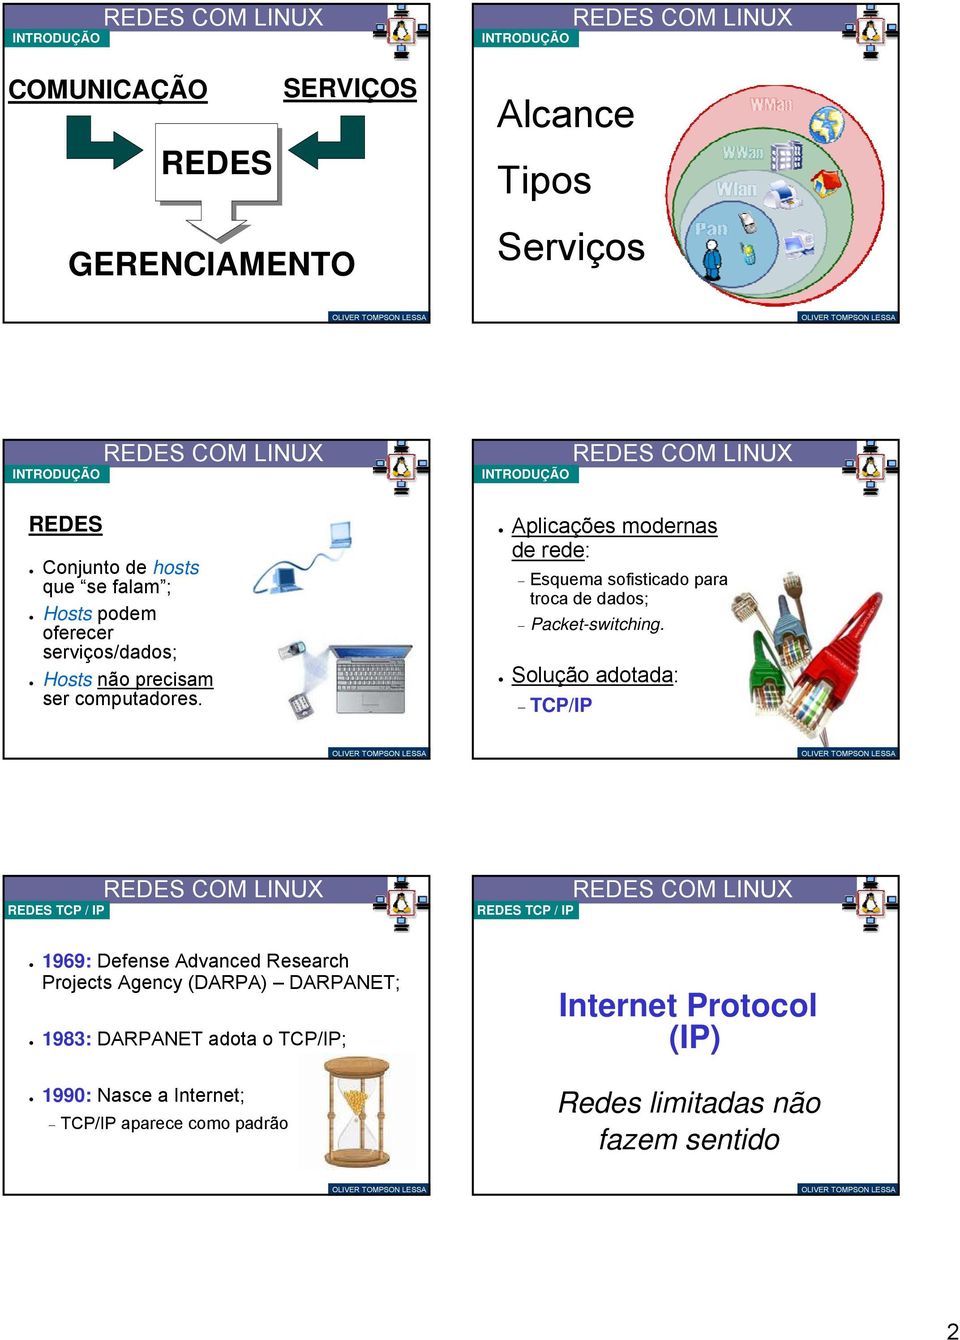 dados; Packet-switching Solução adotada: TCP/IP REDES TCP / IP REDES TCP / IP 1969: Defense Advanced Research Projects Agency (DARPA)